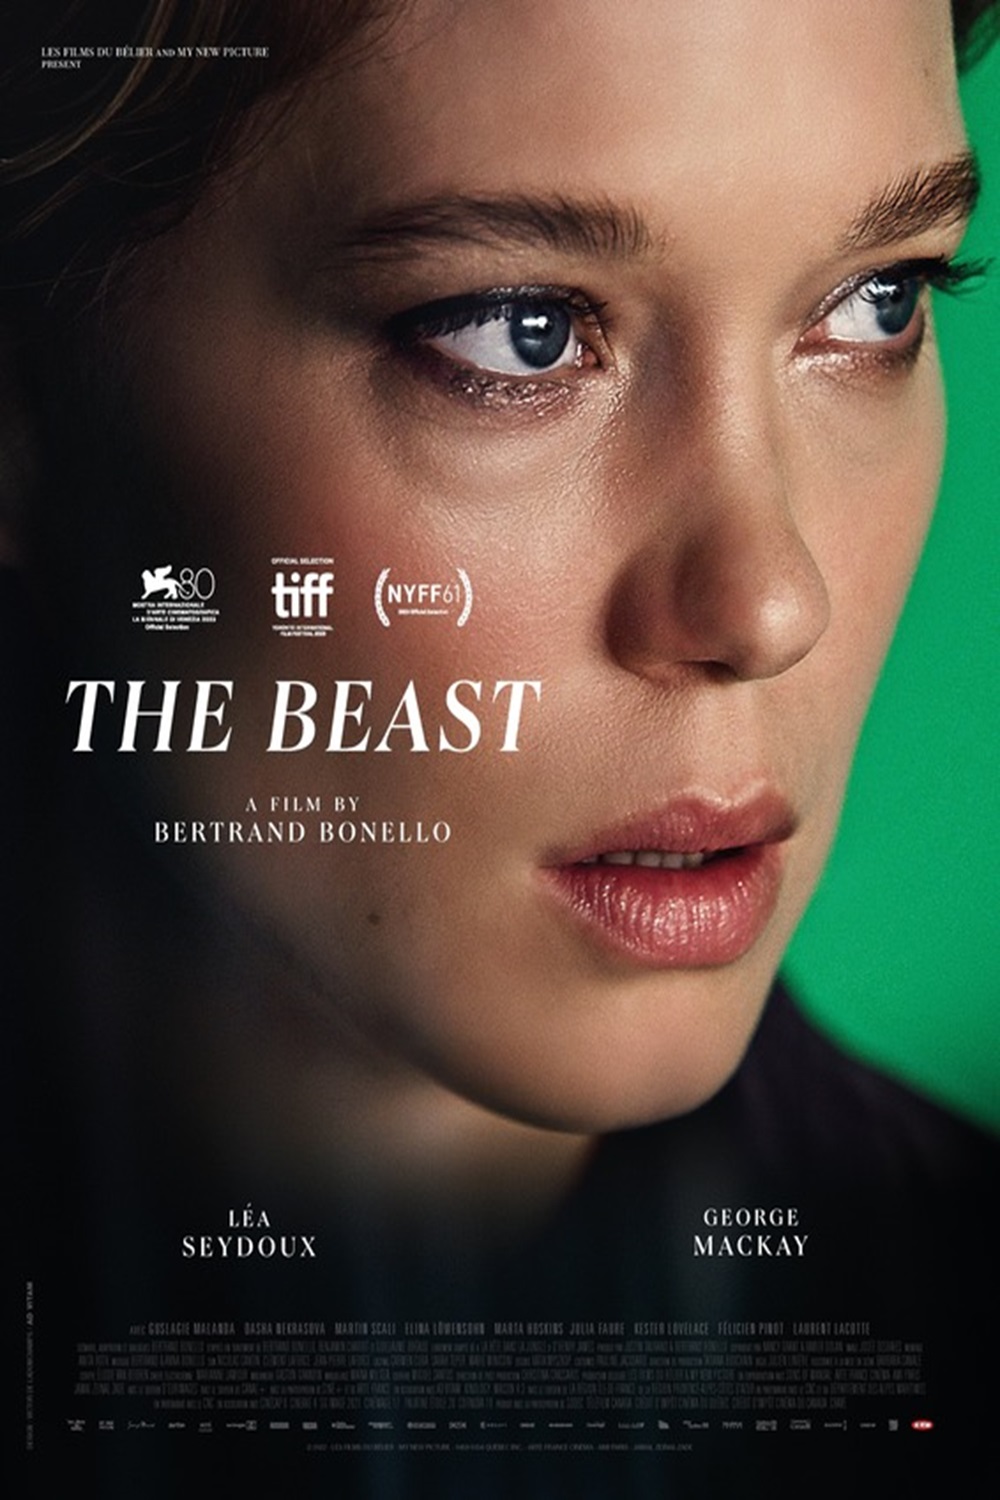 An close up portrait Lea Seydoux, looking intensely to the right in front of a green background. The title THE BEAST is aligned to the left middle of the image.